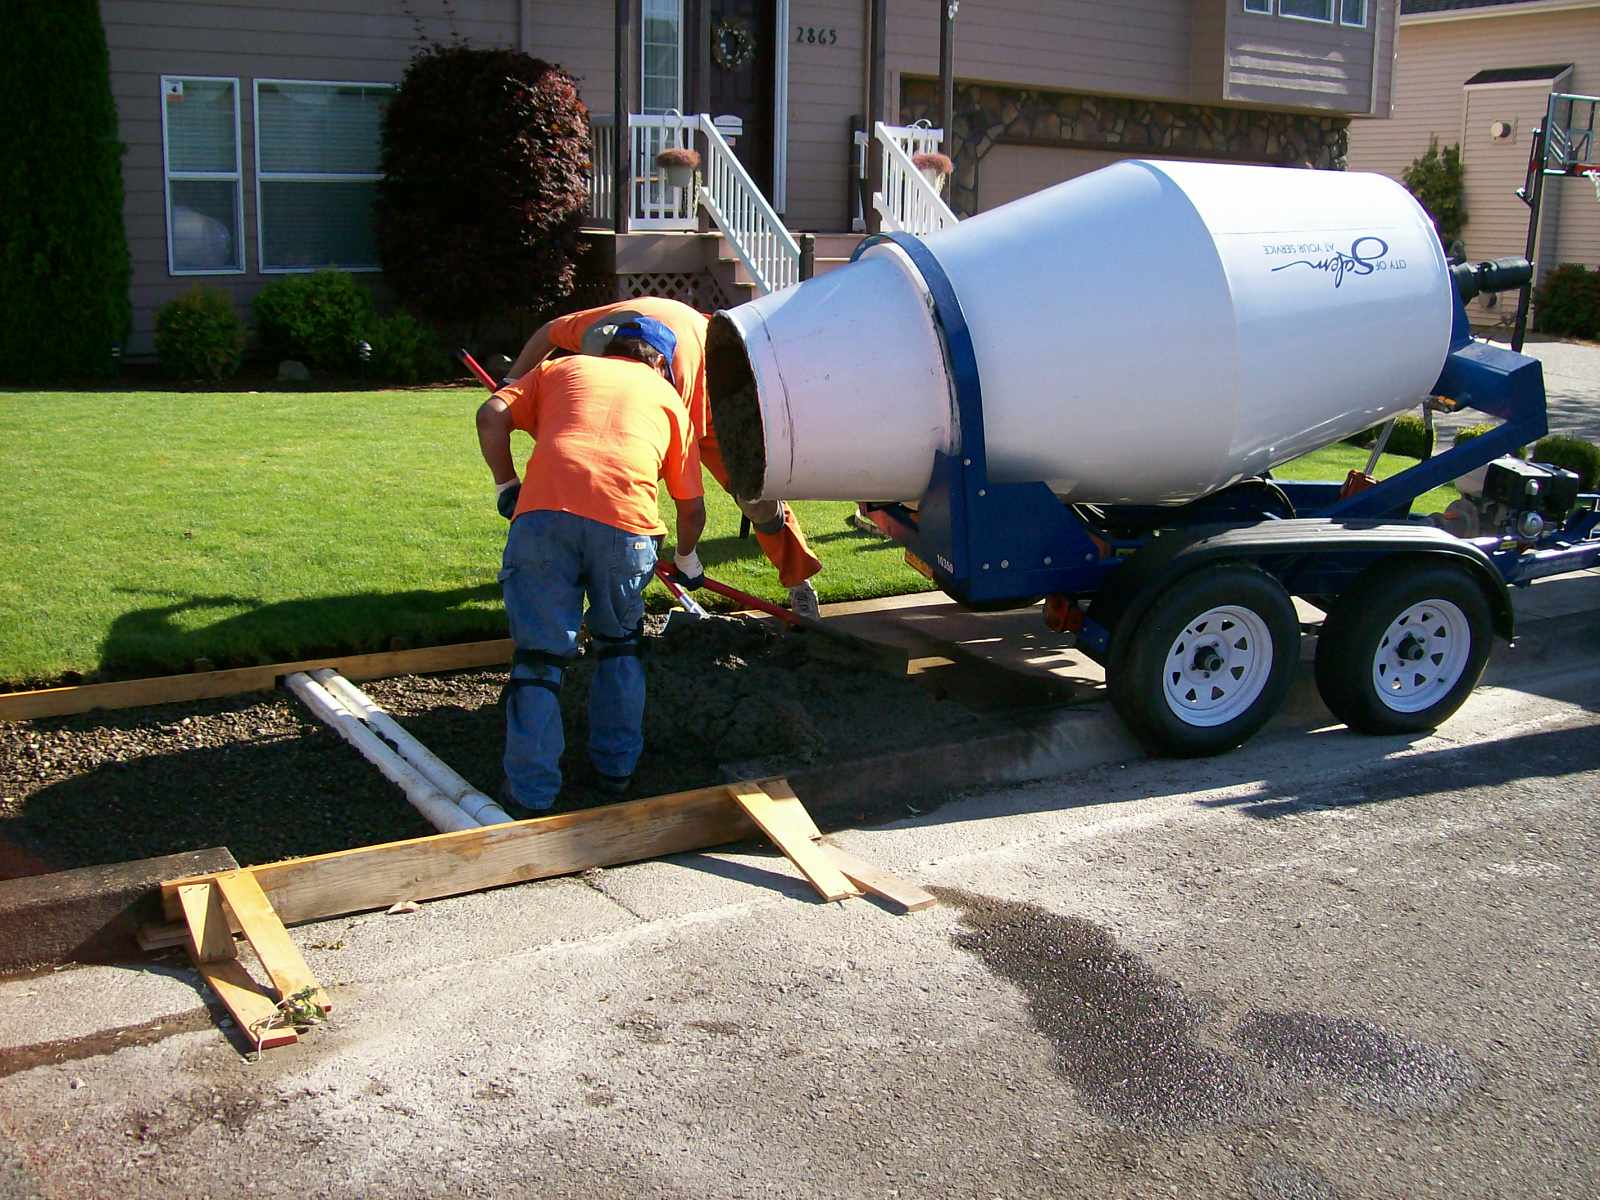 TrailerBased Concrete Offers New Product to Make Delivery Faster and More Compact